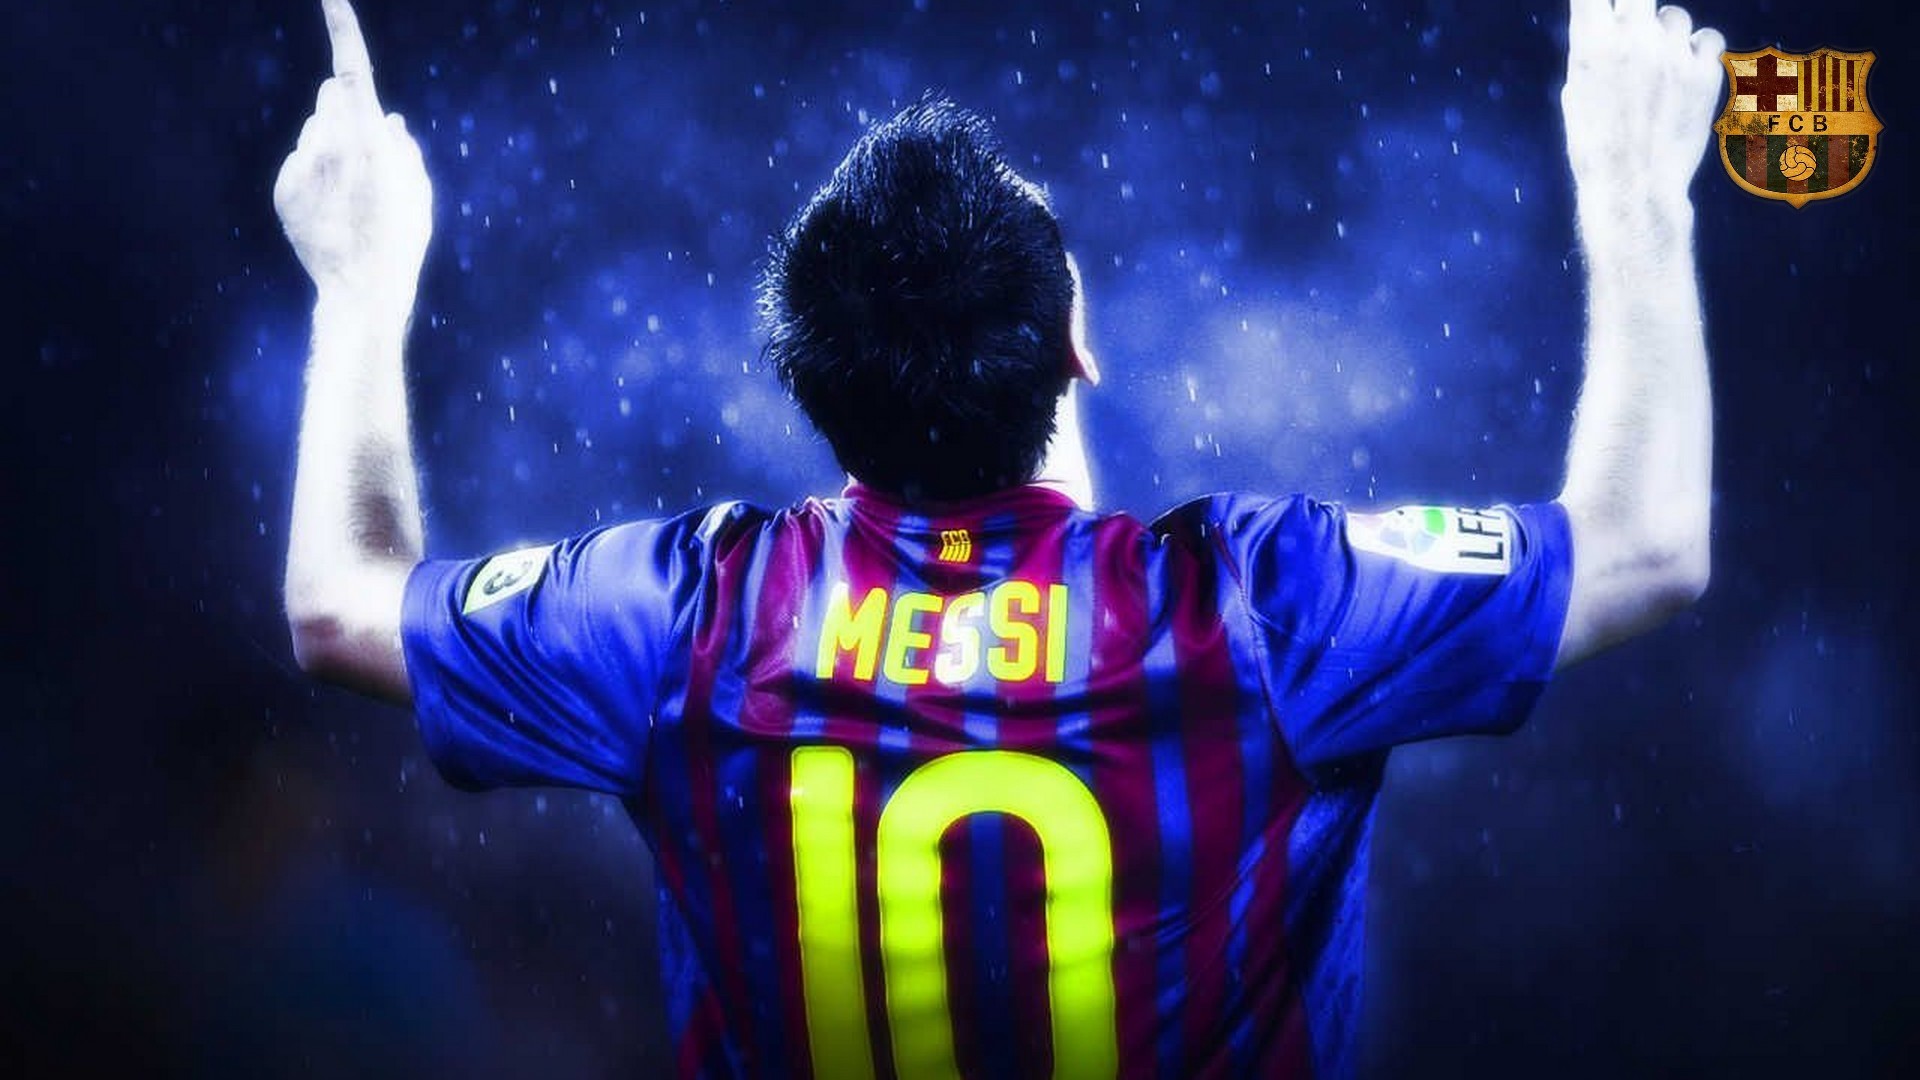 Messi Desktop Wallpaper With Resolution 1920X1080 pixel. You can make this wallpaper for your Mac or Windows Desktop Background, iPhone, Android or Tablet and another Smartphone device for free